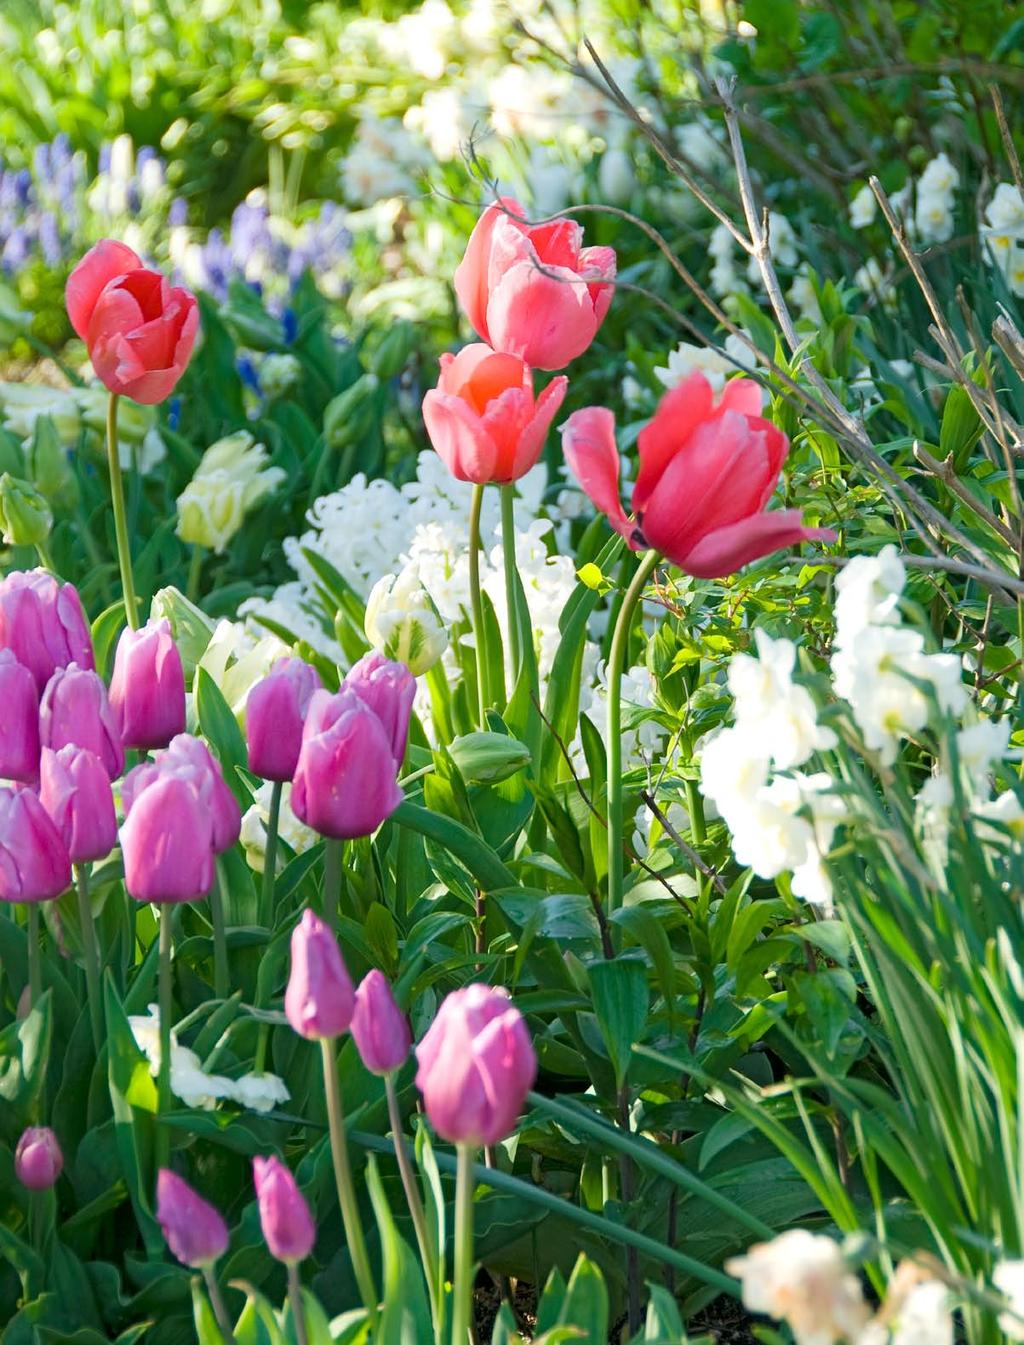 Opposite: Purple Prince and Pink Impression tulips partner with white hyacinths and white Cheerfulness daffodil, which produces multiple double blooms. foliage to die back naturally, Debbie says.